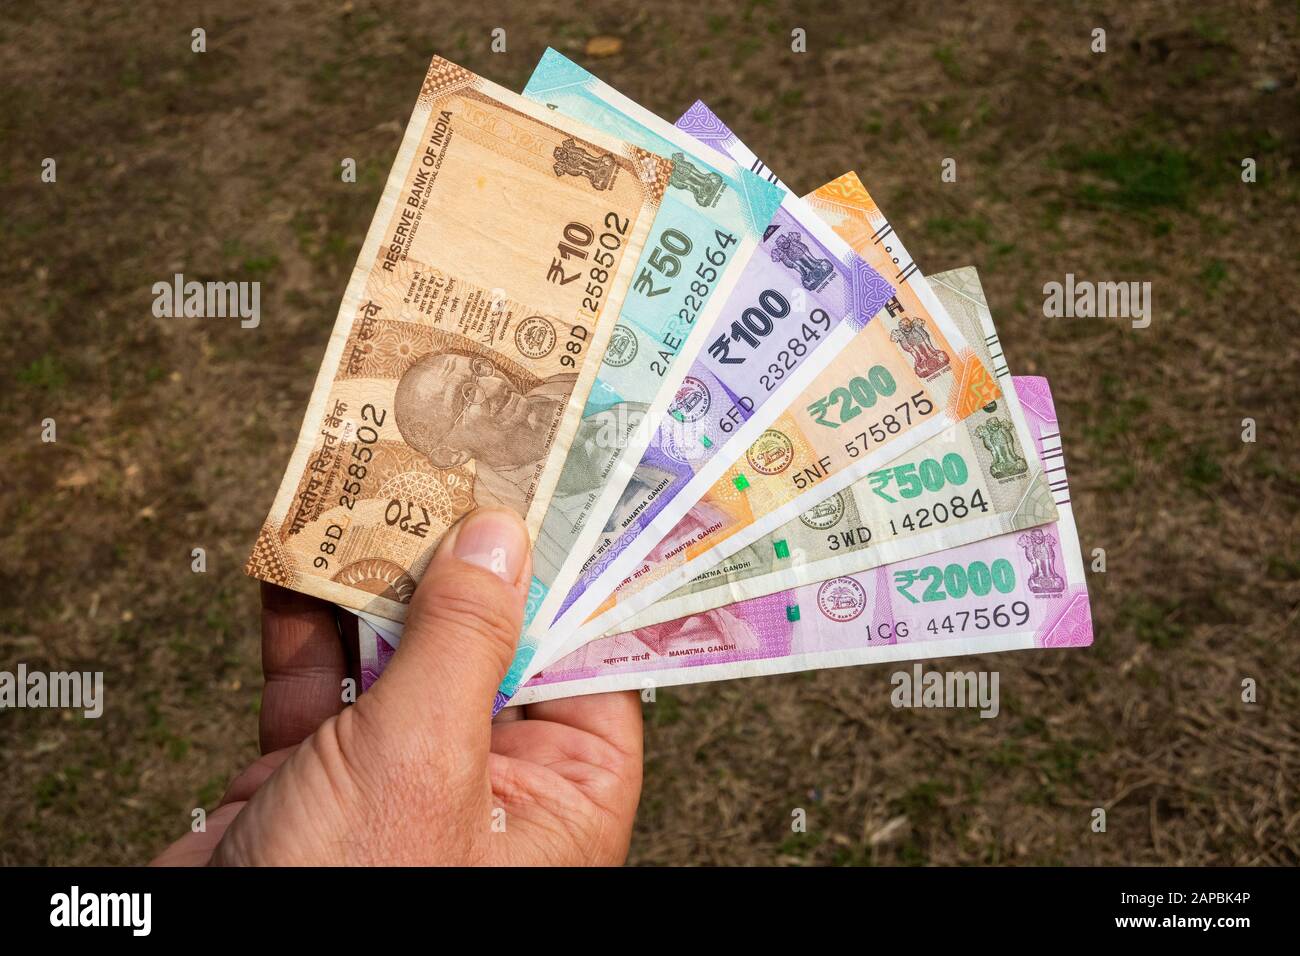 India, money, hand holding 2020 Reserve Bank of India currency banknotes Stock Photo